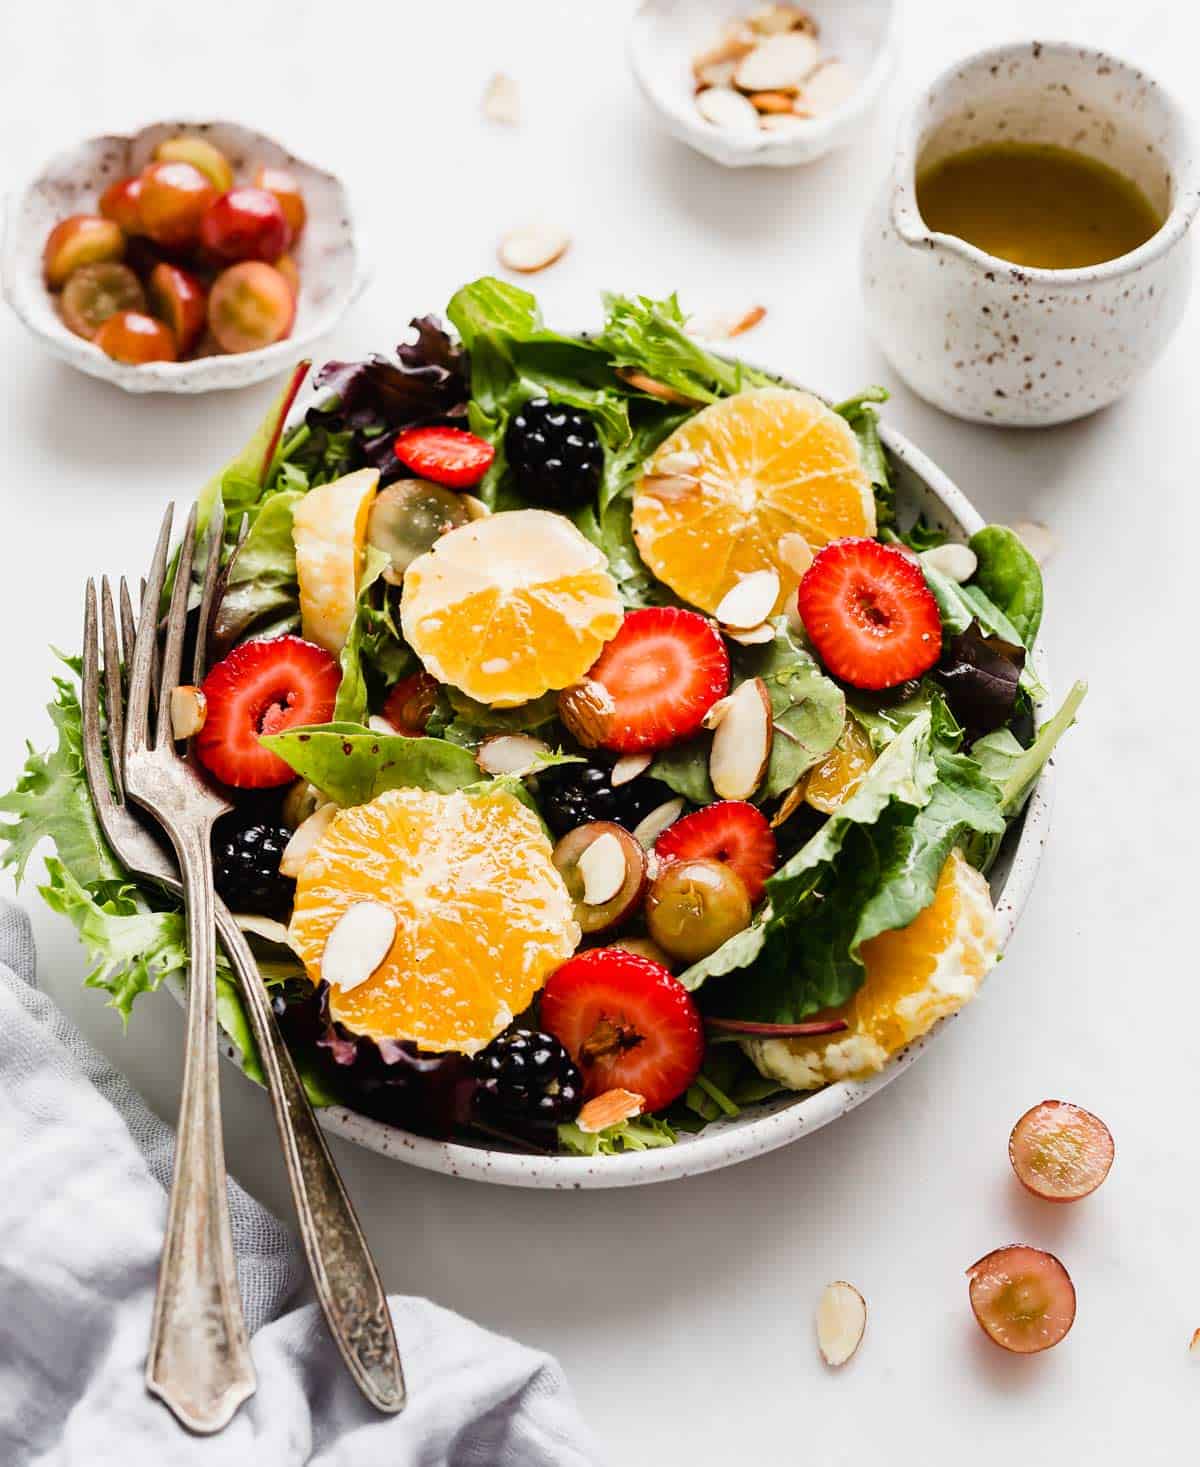 A summer salad topped with oranges, strawberries, blackberries, grapes, and almonds.